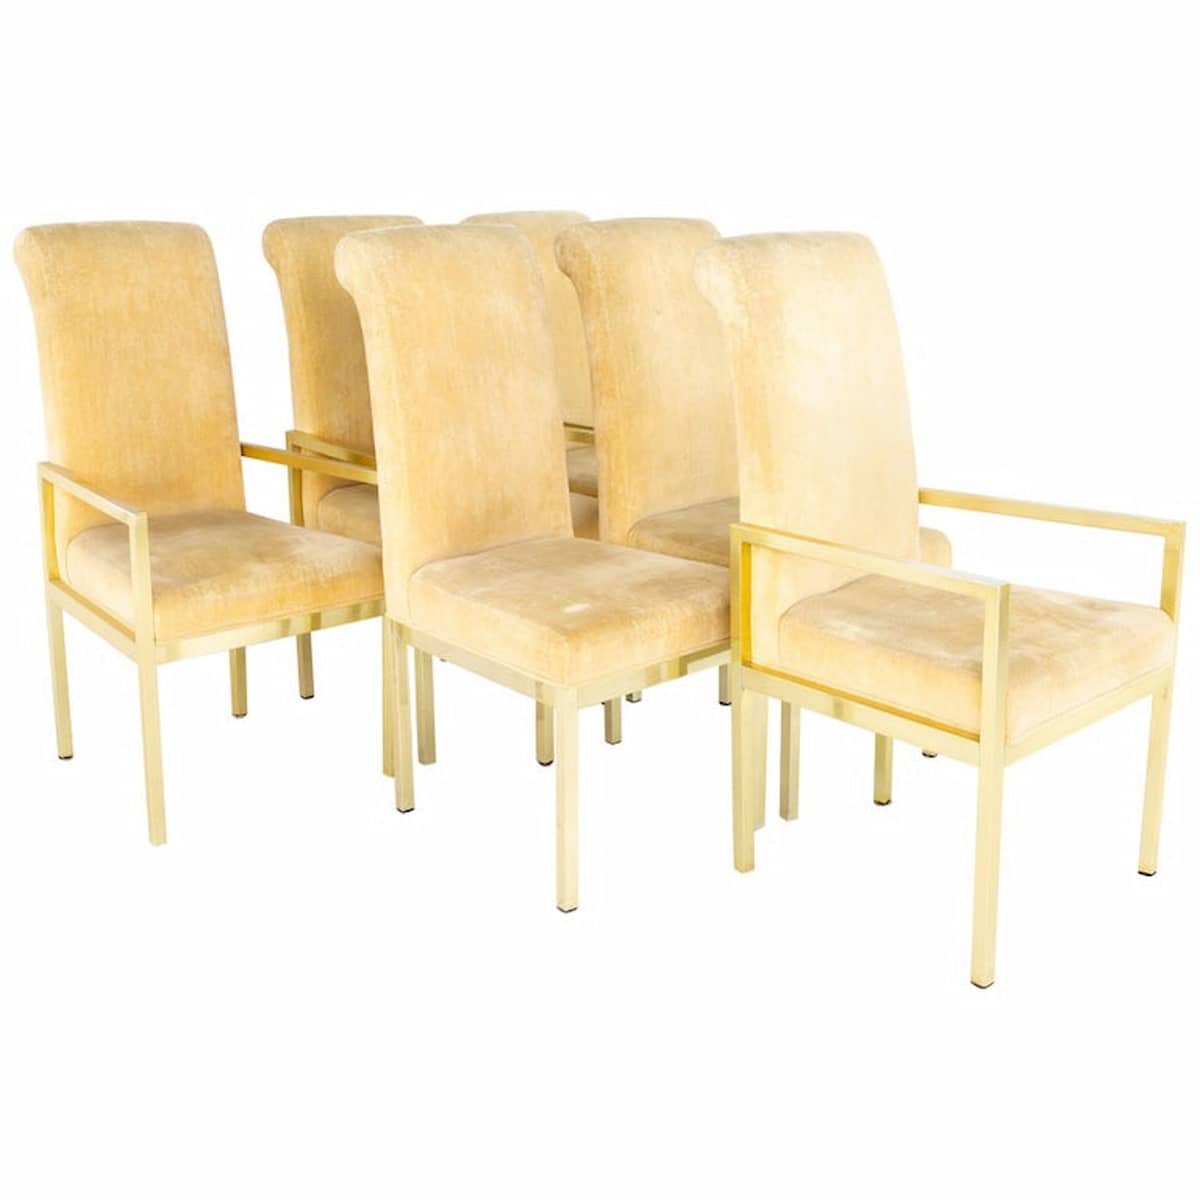 Milo Baughman for Design Institute of America Mid Century Brass Dining Chairs - Set of 6